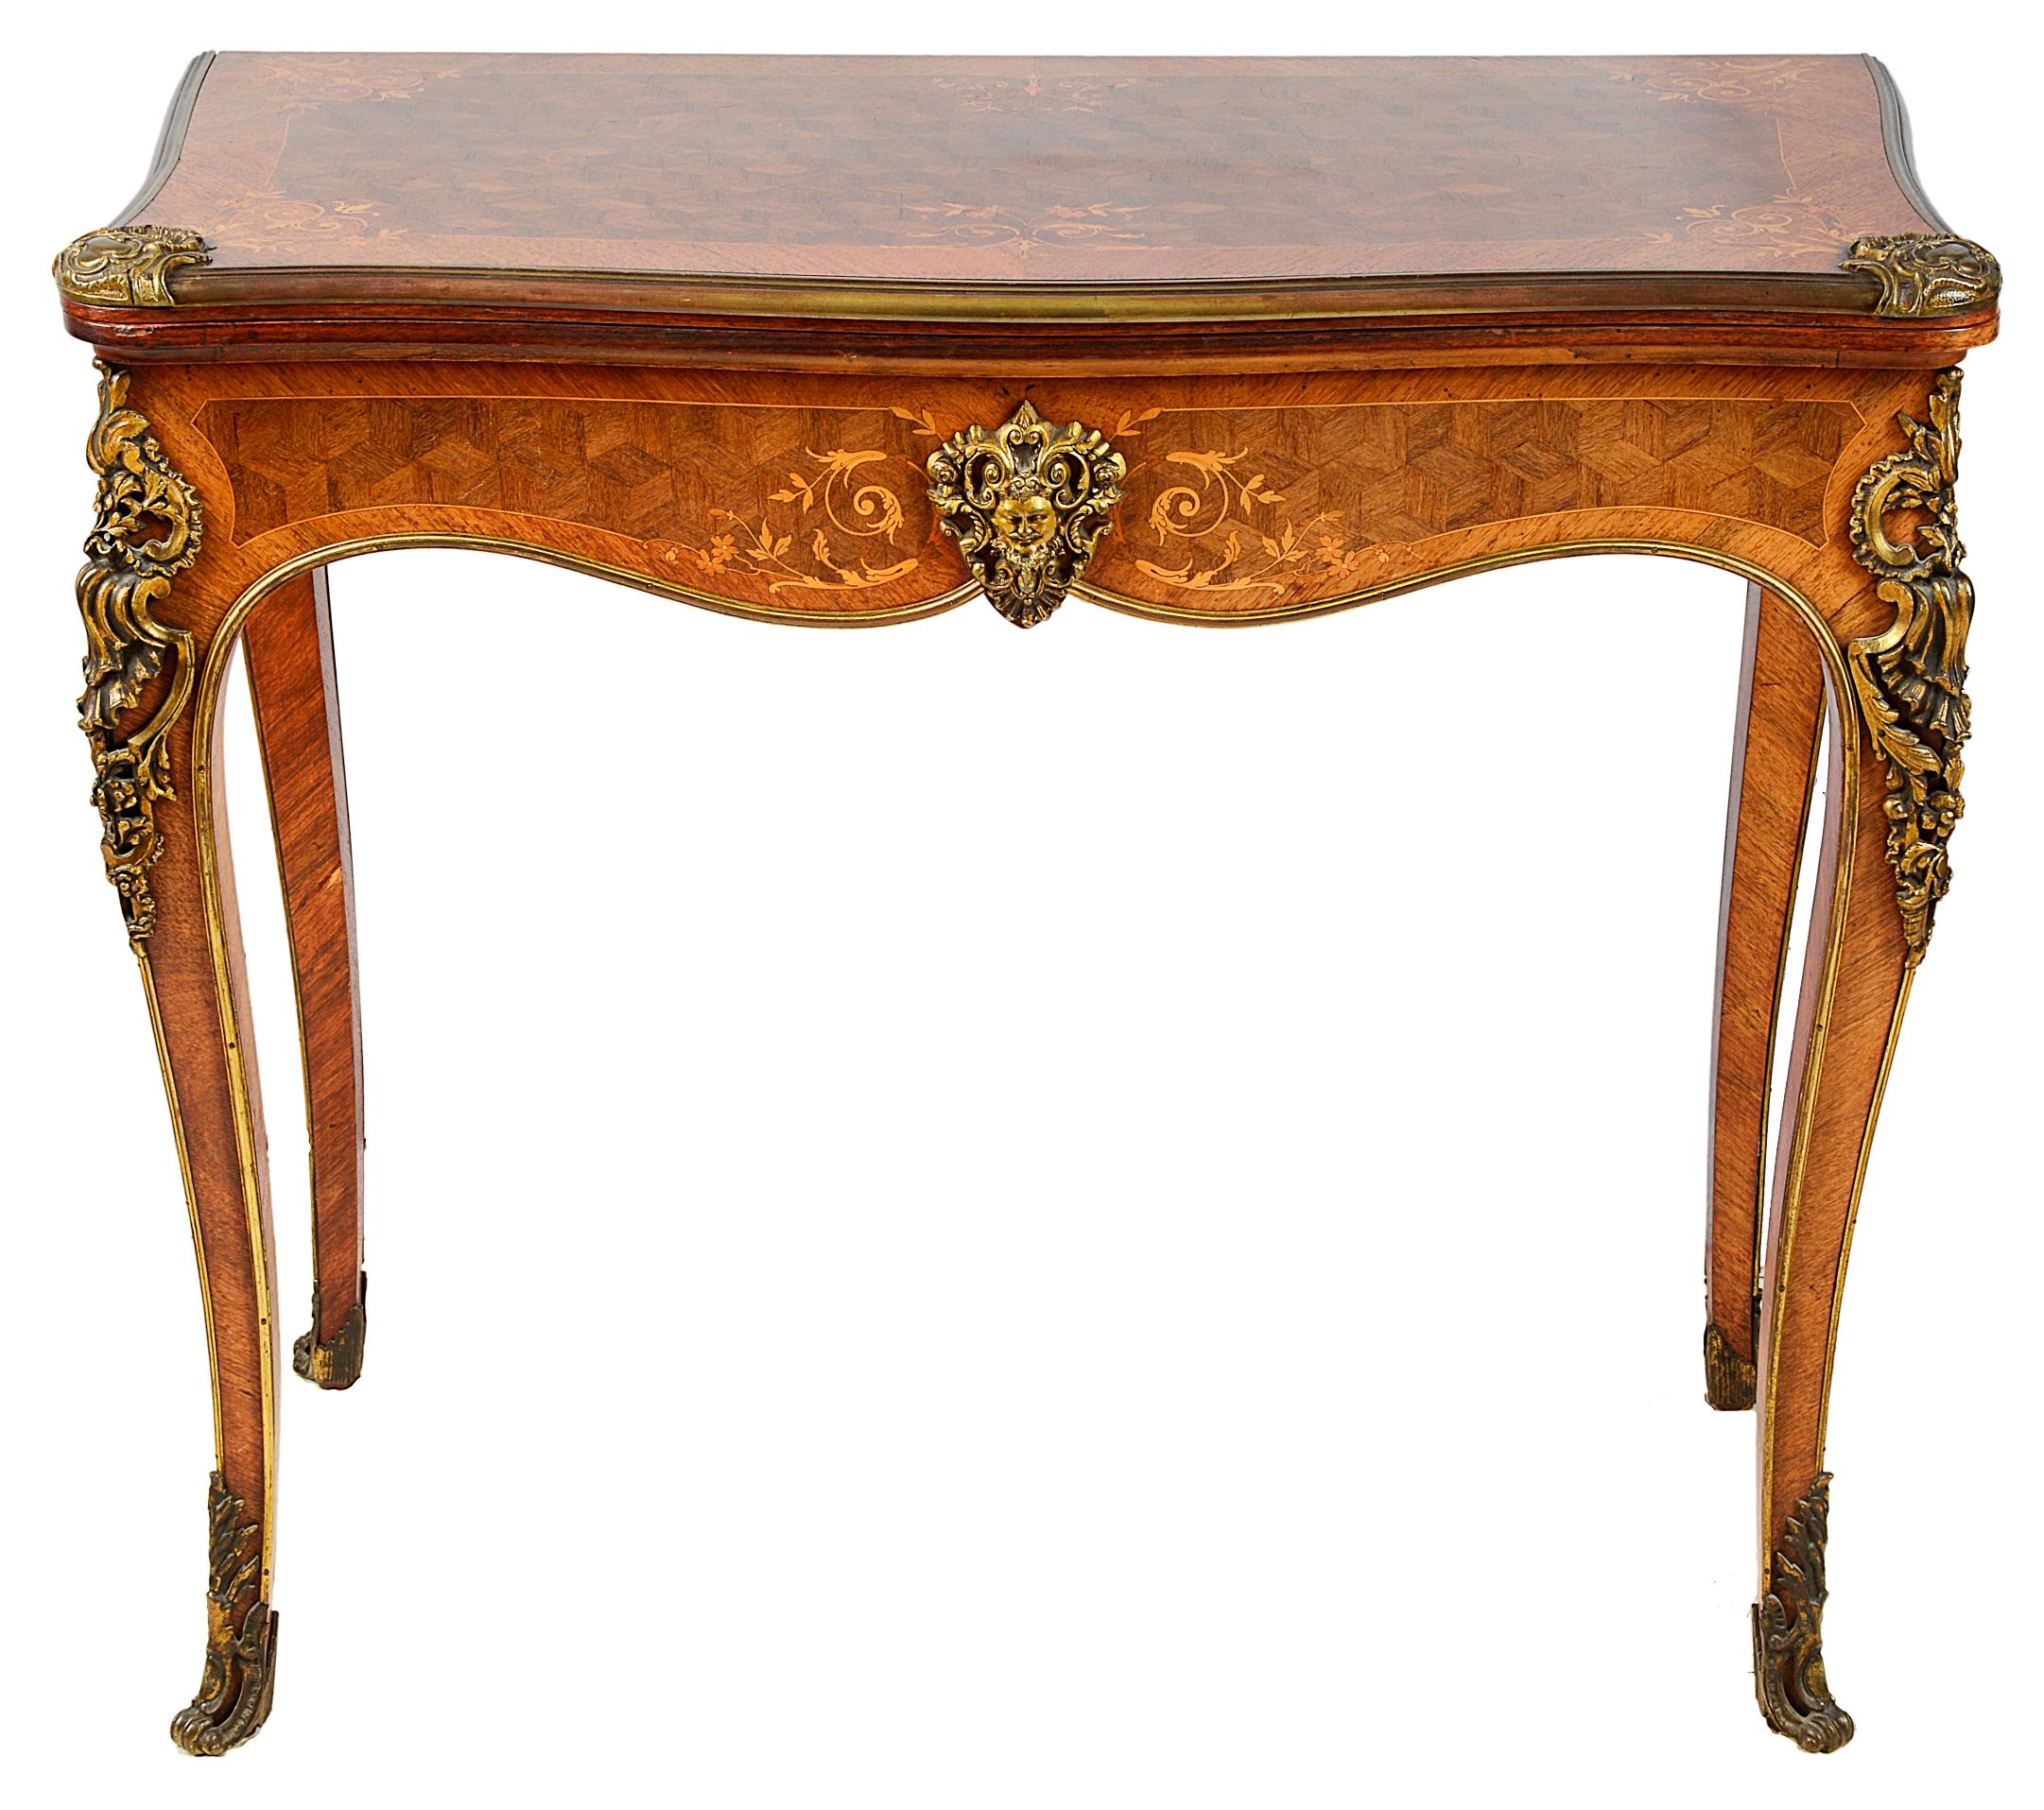 A fine quality late 19th century parquetry inlaid, ormolu-mounted card table.